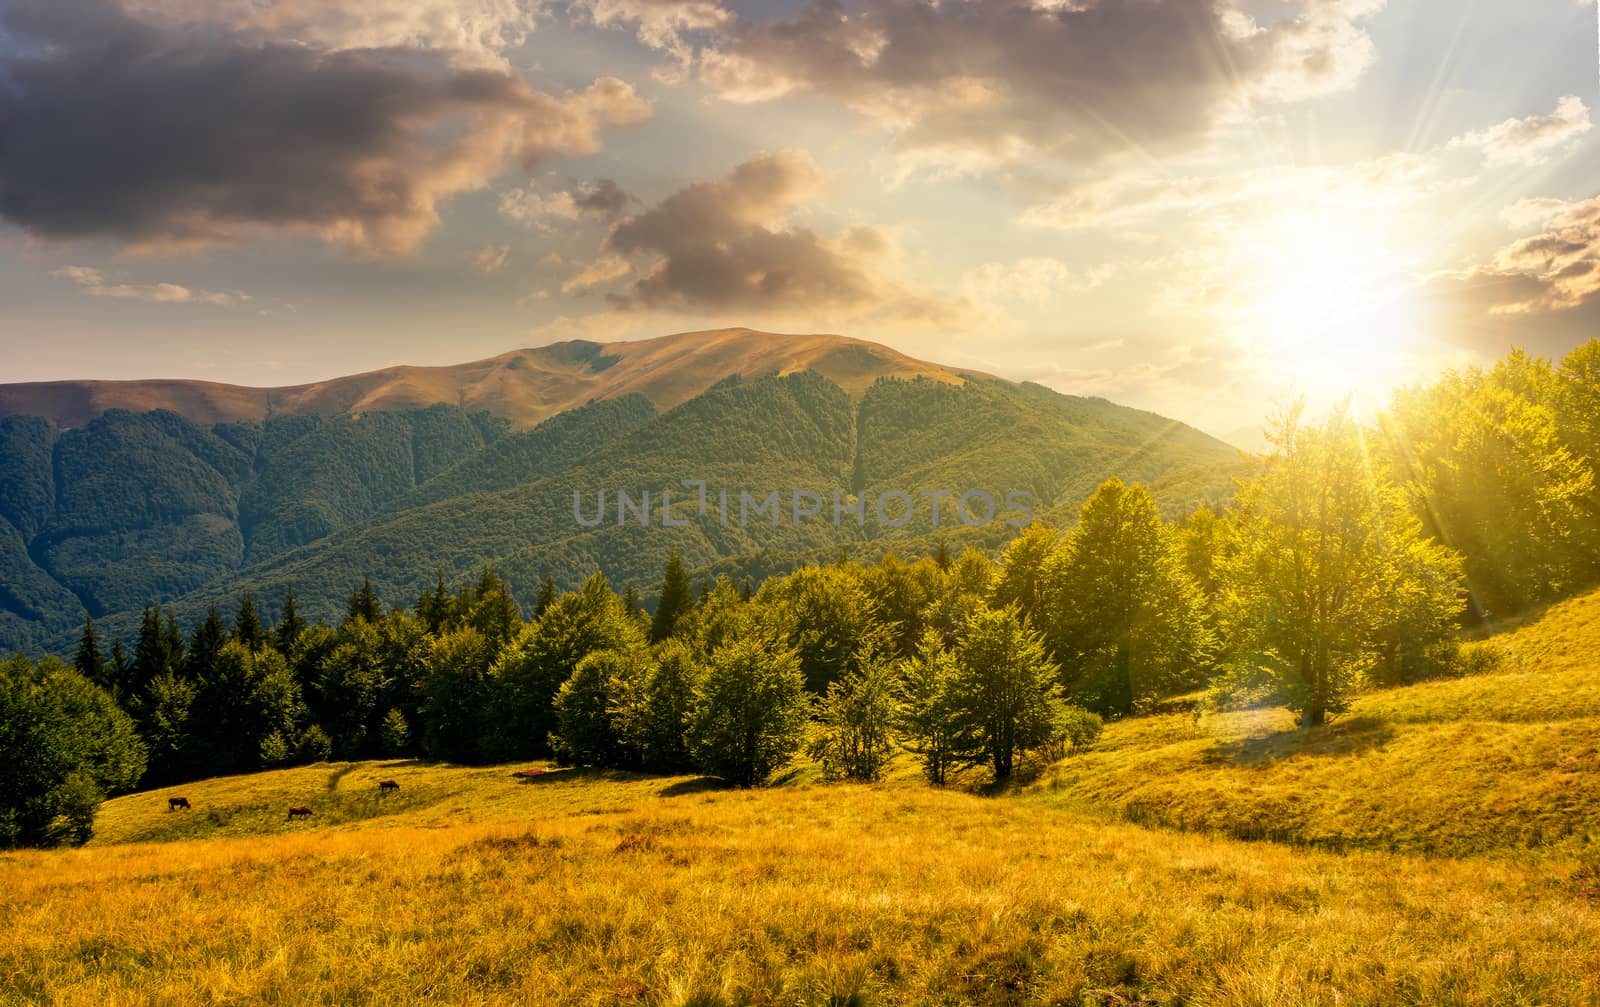 forest on grassy meadows in mountains at sunset by Pellinni